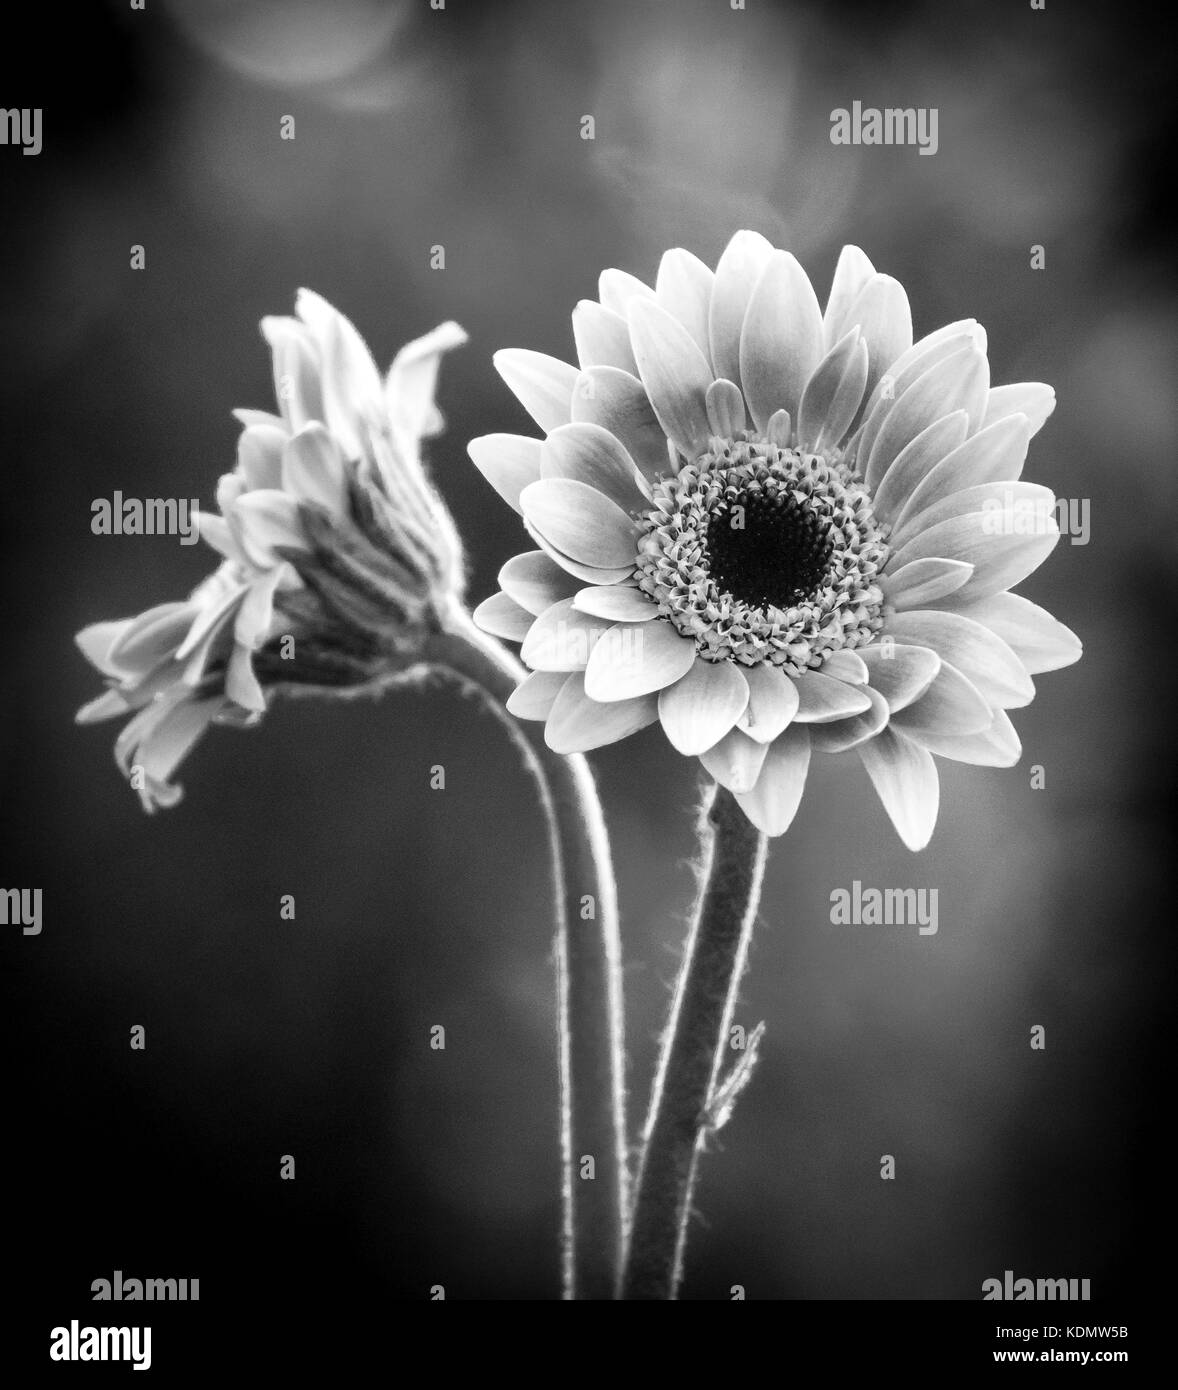 black and white of two gerbera daisies with shallow depth of field Stock Photo